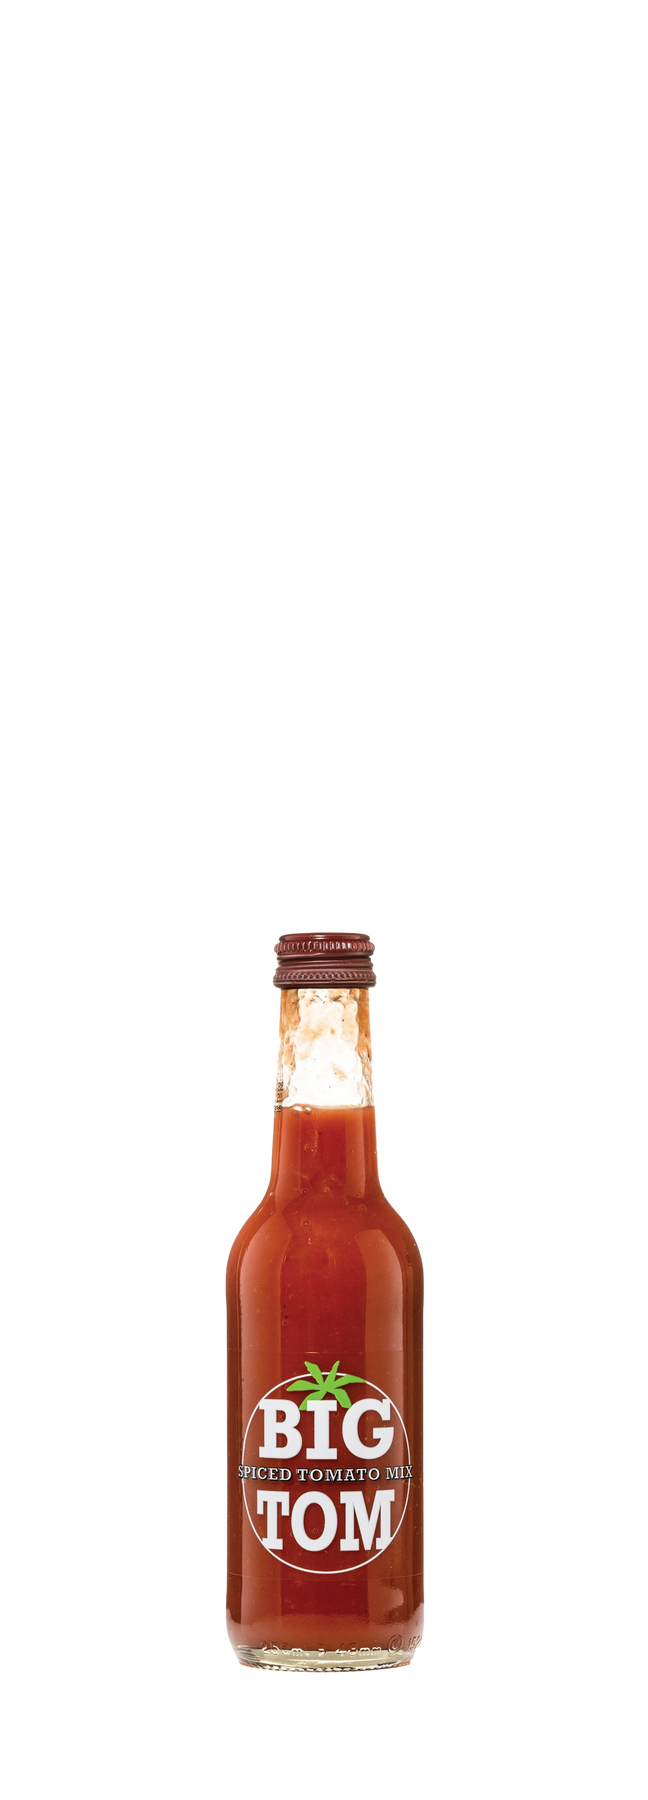 Spiced tomato mix 600cl